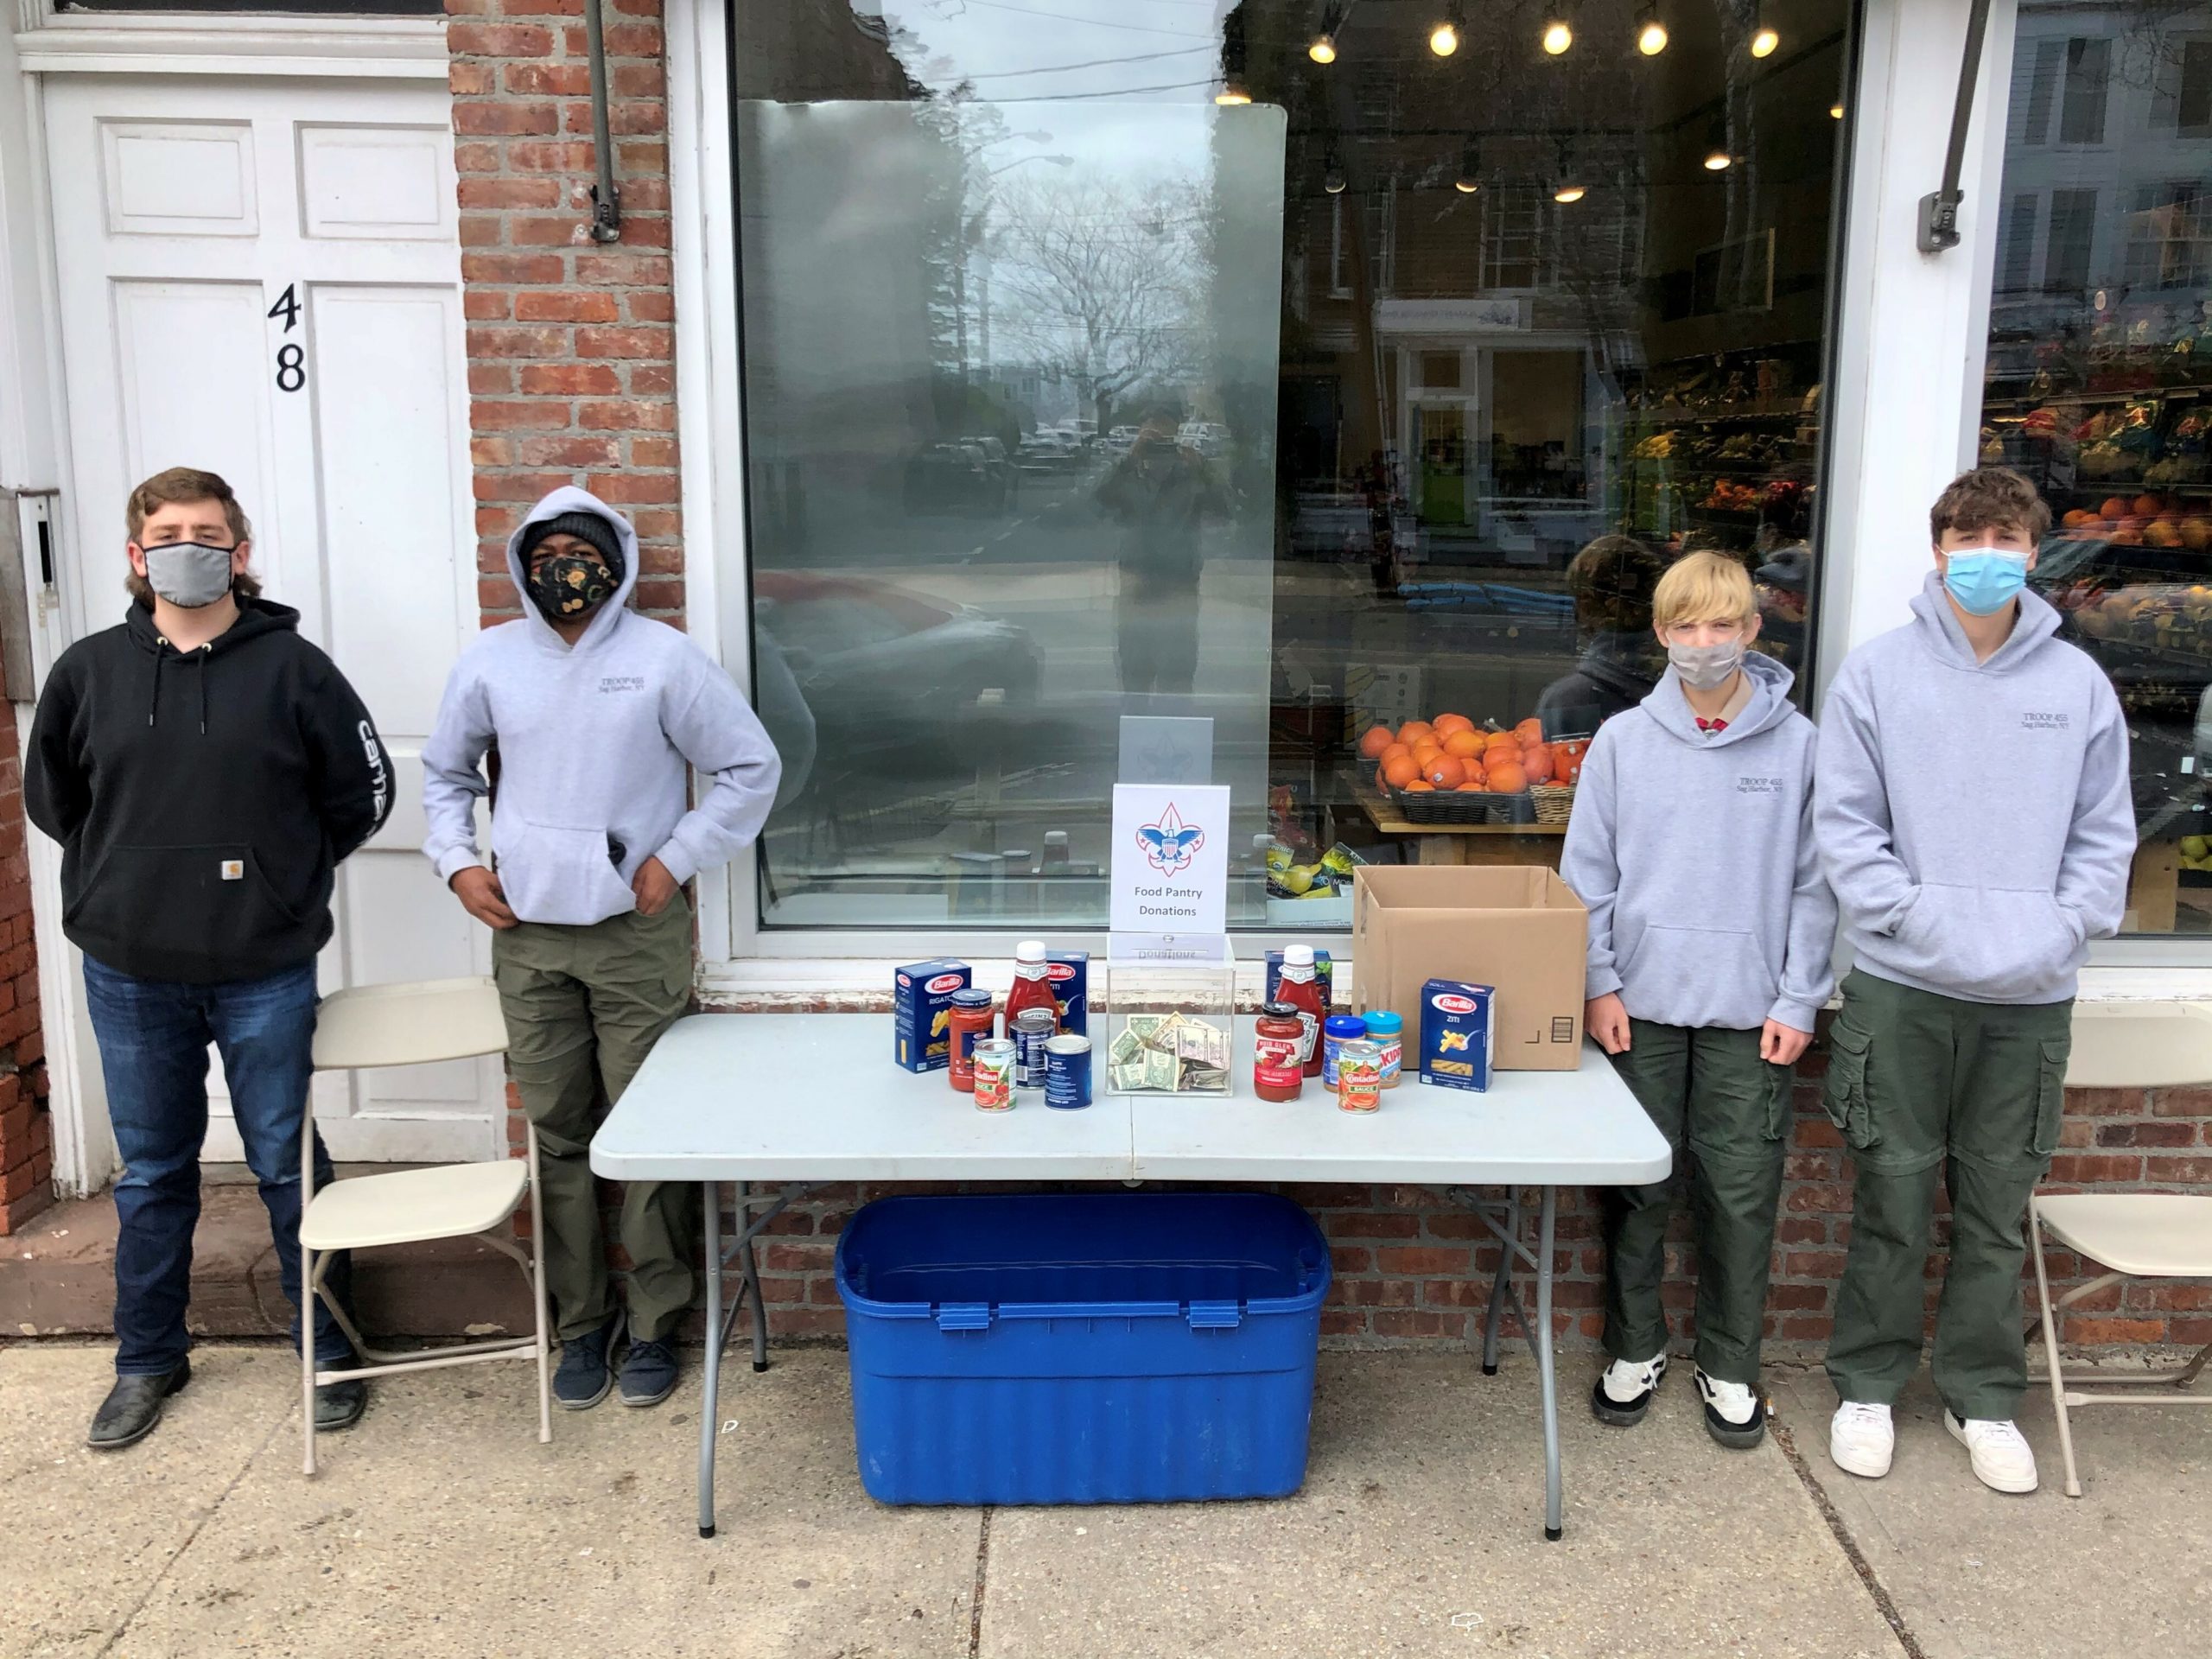 James Farrell, Keanu King, Michael Ramundo and Troy Remkus were a part of a food drive held by the Boy Scouts of Troop 455 Sag Harbor last Saturday, April 24, on Main Street in support of the Sag Harbor Food Pantry. The troop collected a large box of food donations and $208 to support the pantry’s efforts.